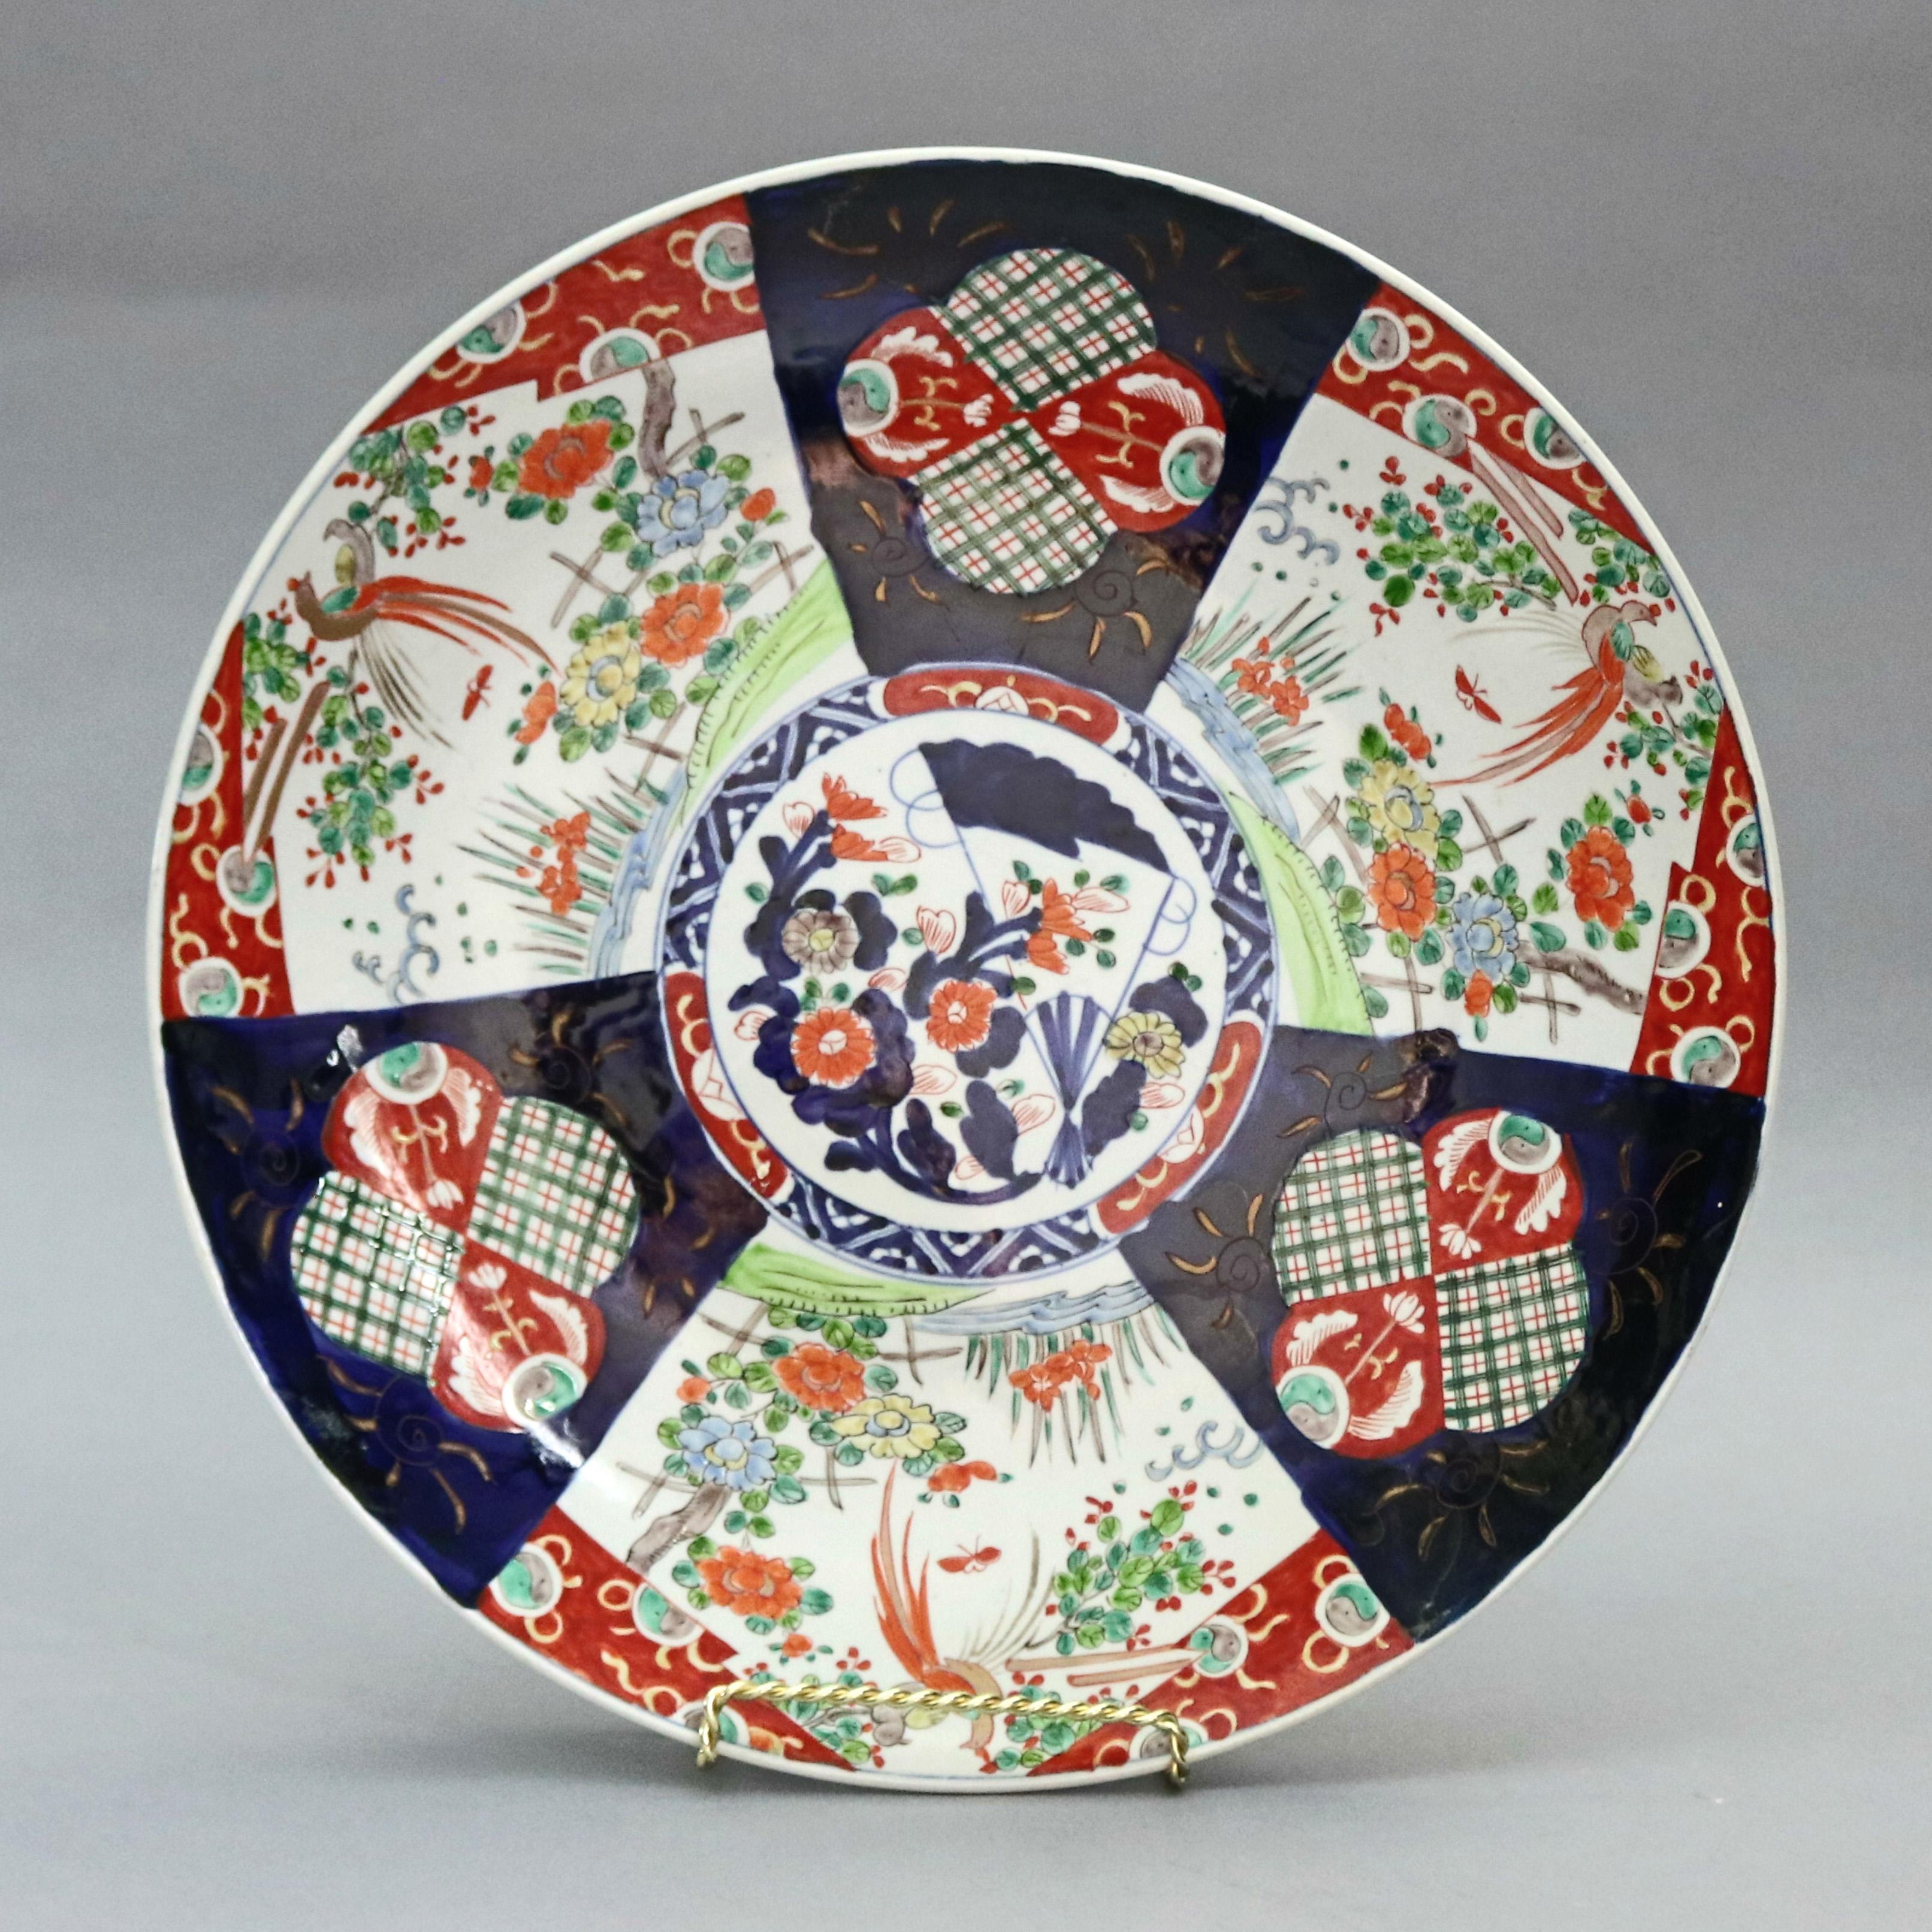 An antique and oversized Japanese Imari charger offers porcelain construction with central medallion having garden scene with fan surrounded by panels having garden elements, en verso blue paint decorated, circa 1900

Measures: 2.5